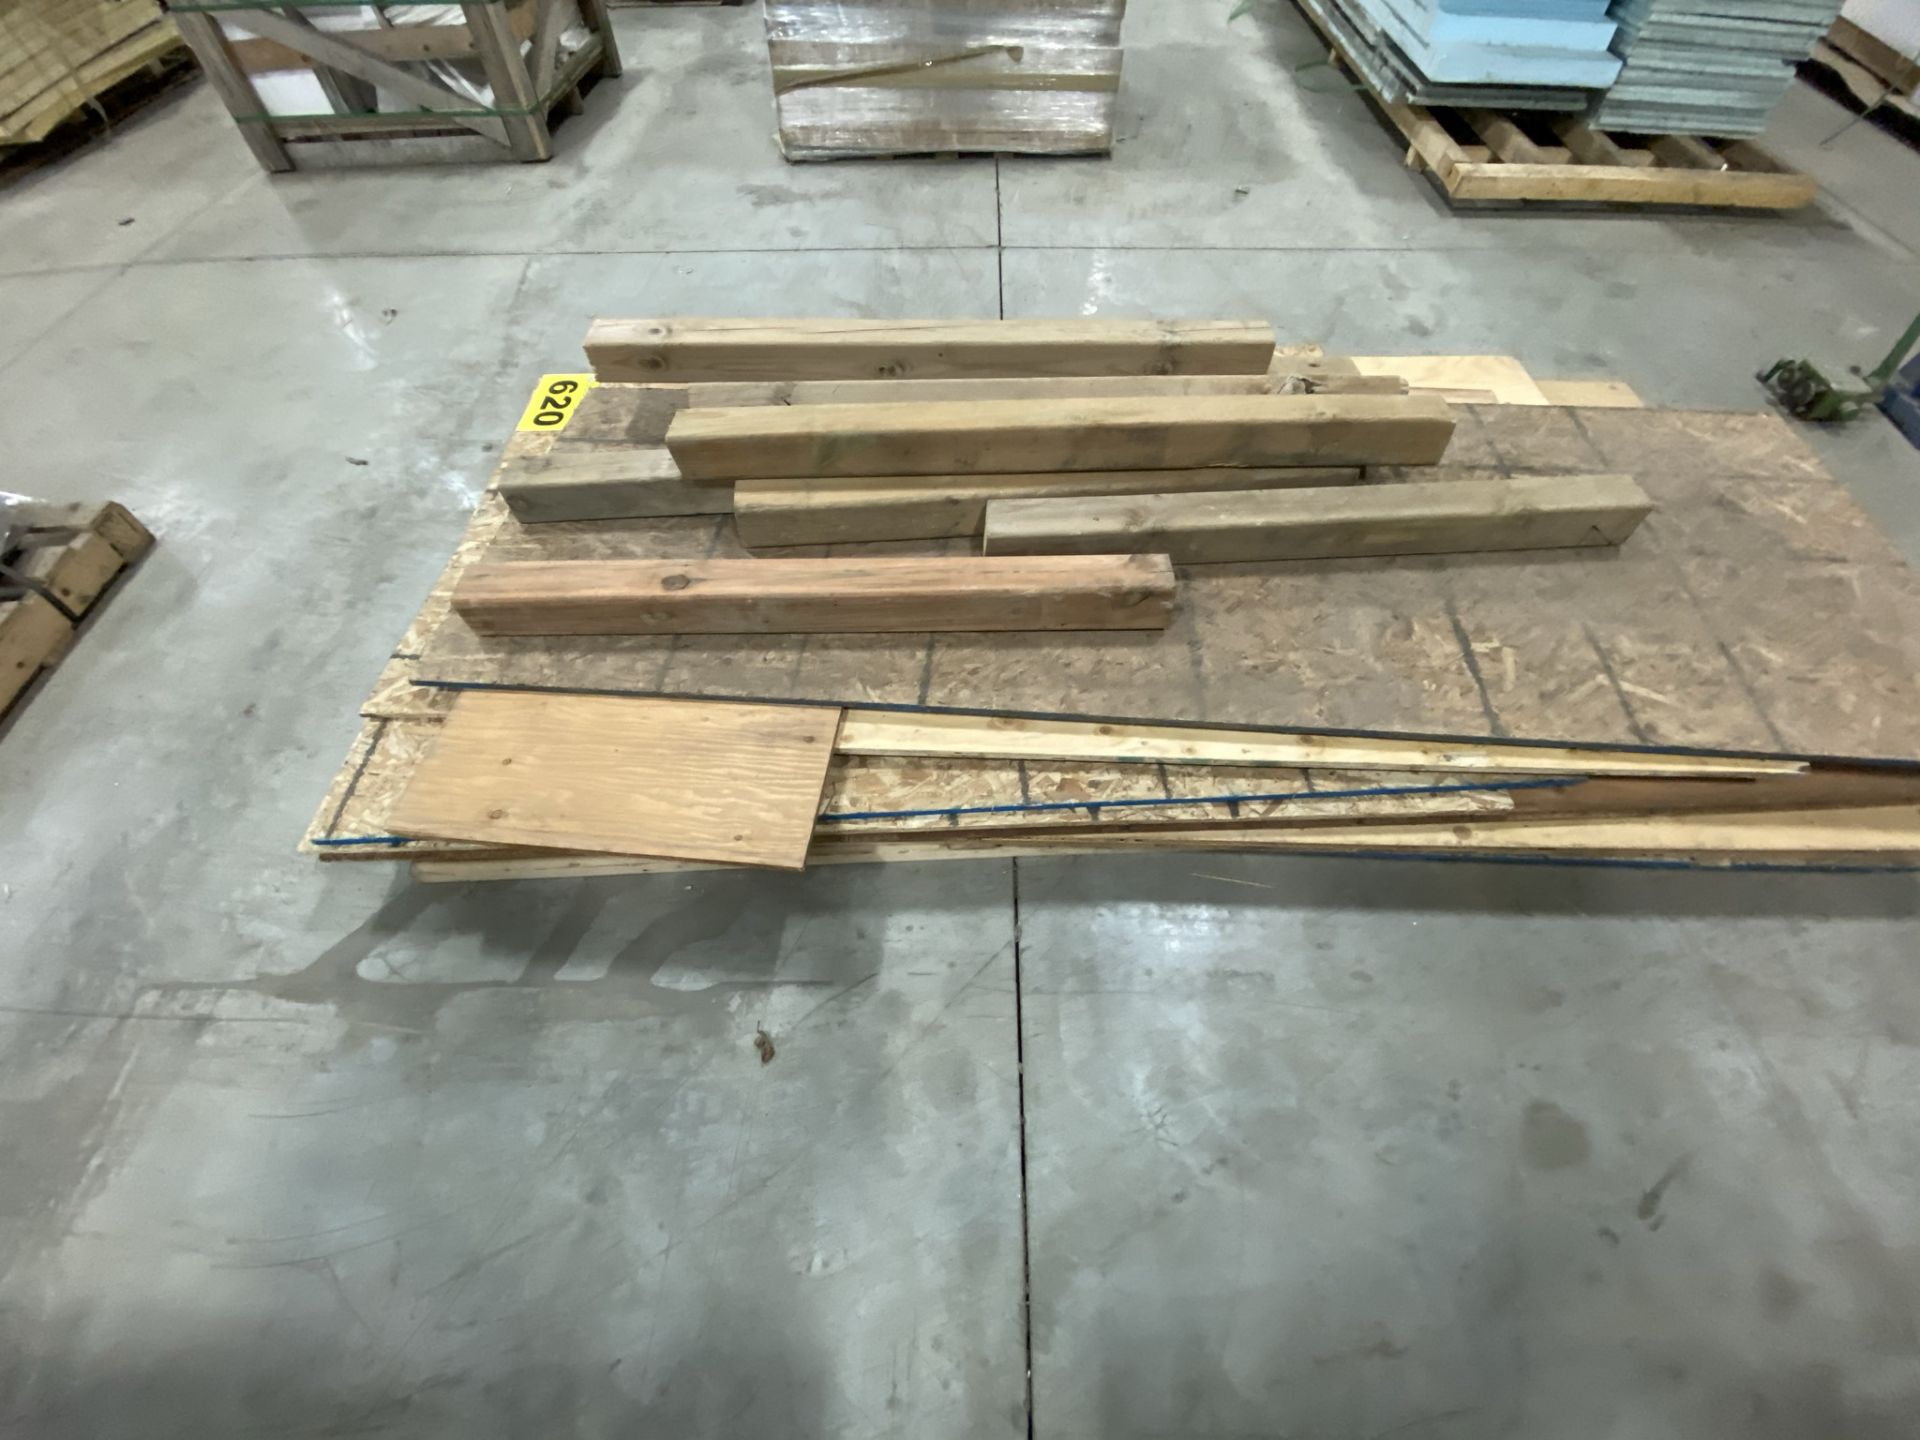 LOT OF FOUNDATION LUMBER FROM PLYWOOD BOARD - Image 3 of 3